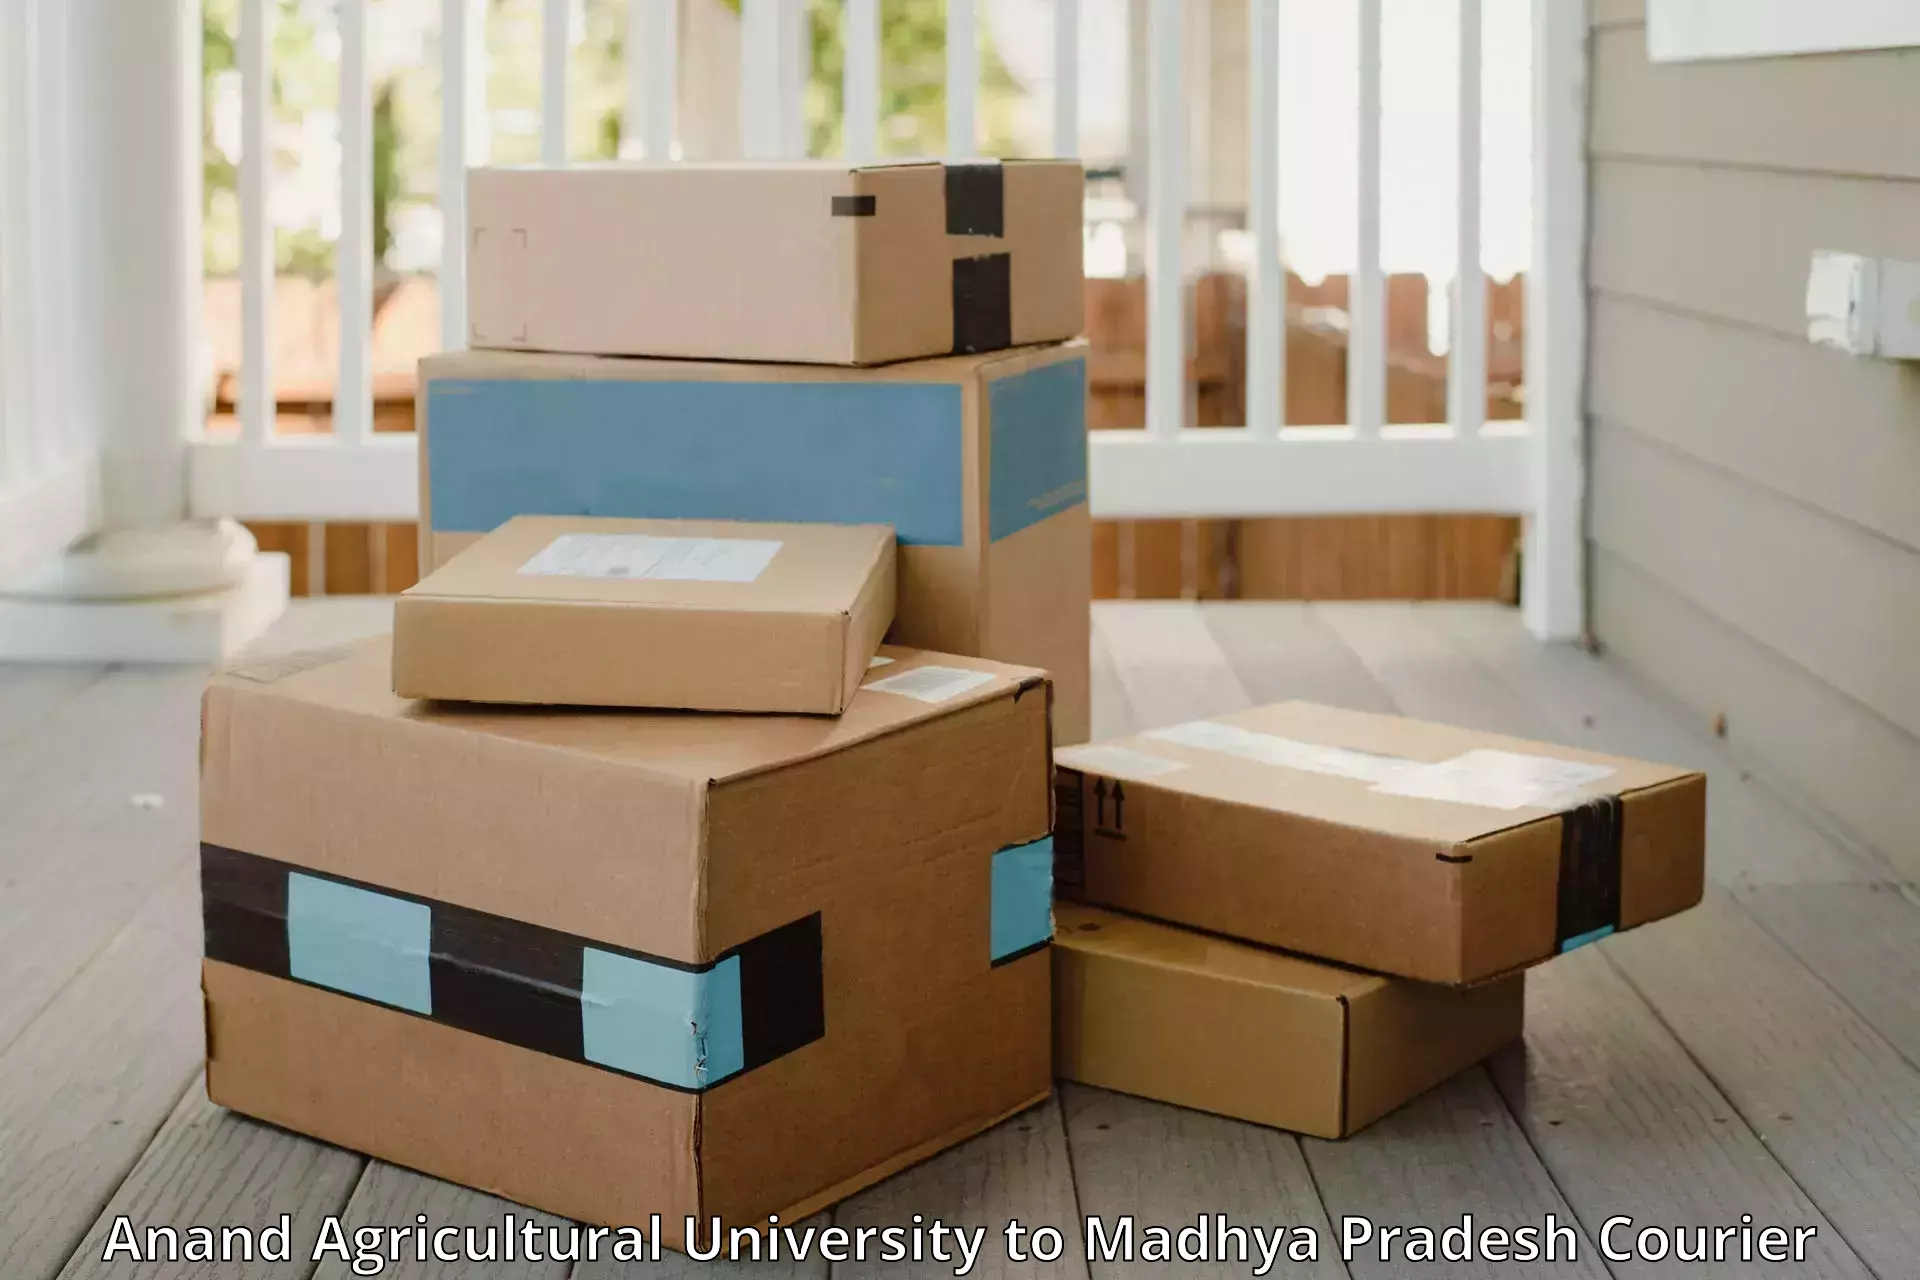 Baggage transport management Anand Agricultural University to Gosalpur